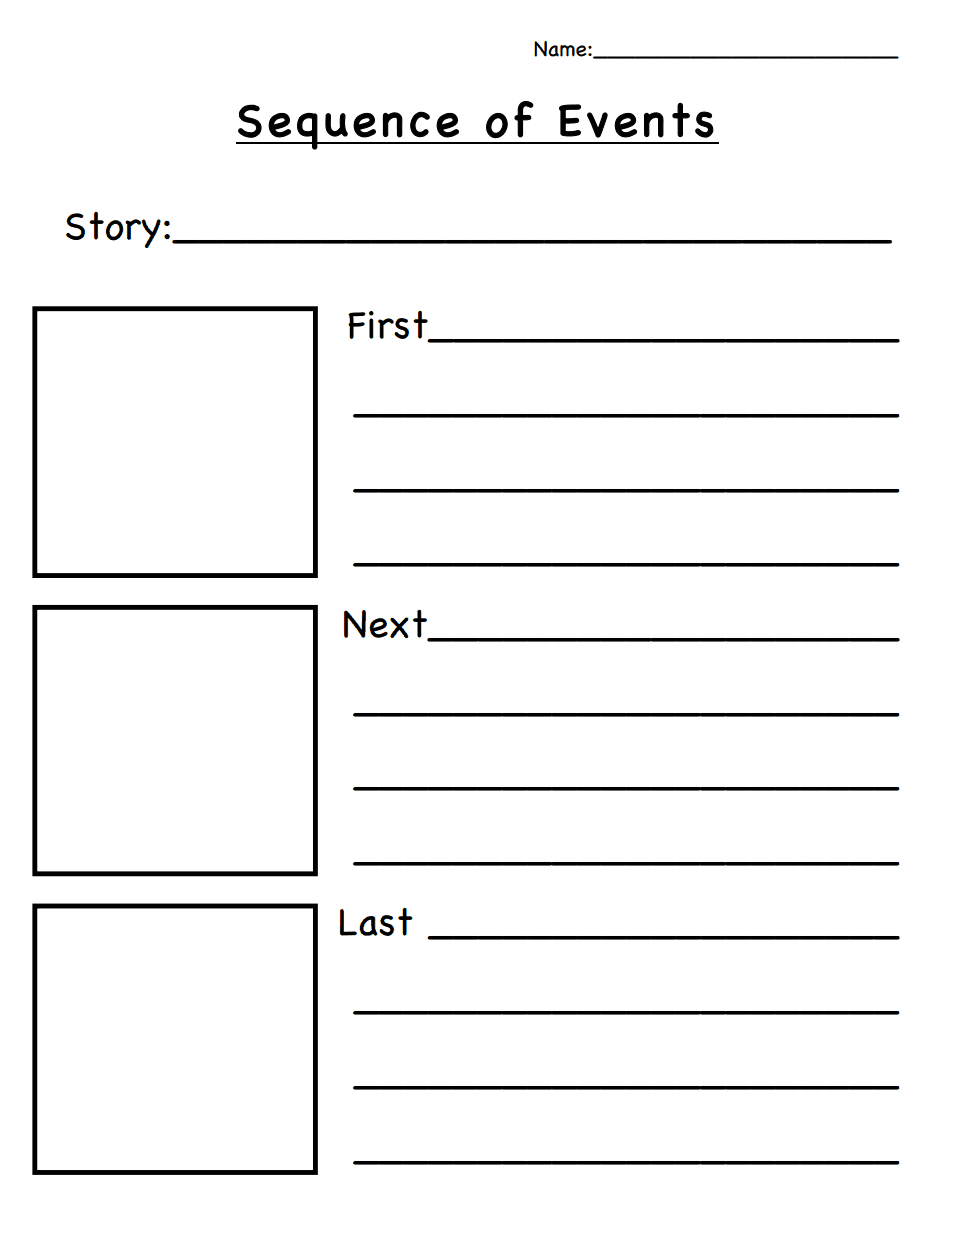 Sequence Of Events.pdf | Classroom Ideas | Sequencing Worksheets - Free Printable Sequencing Worksheets 2Nd Grade